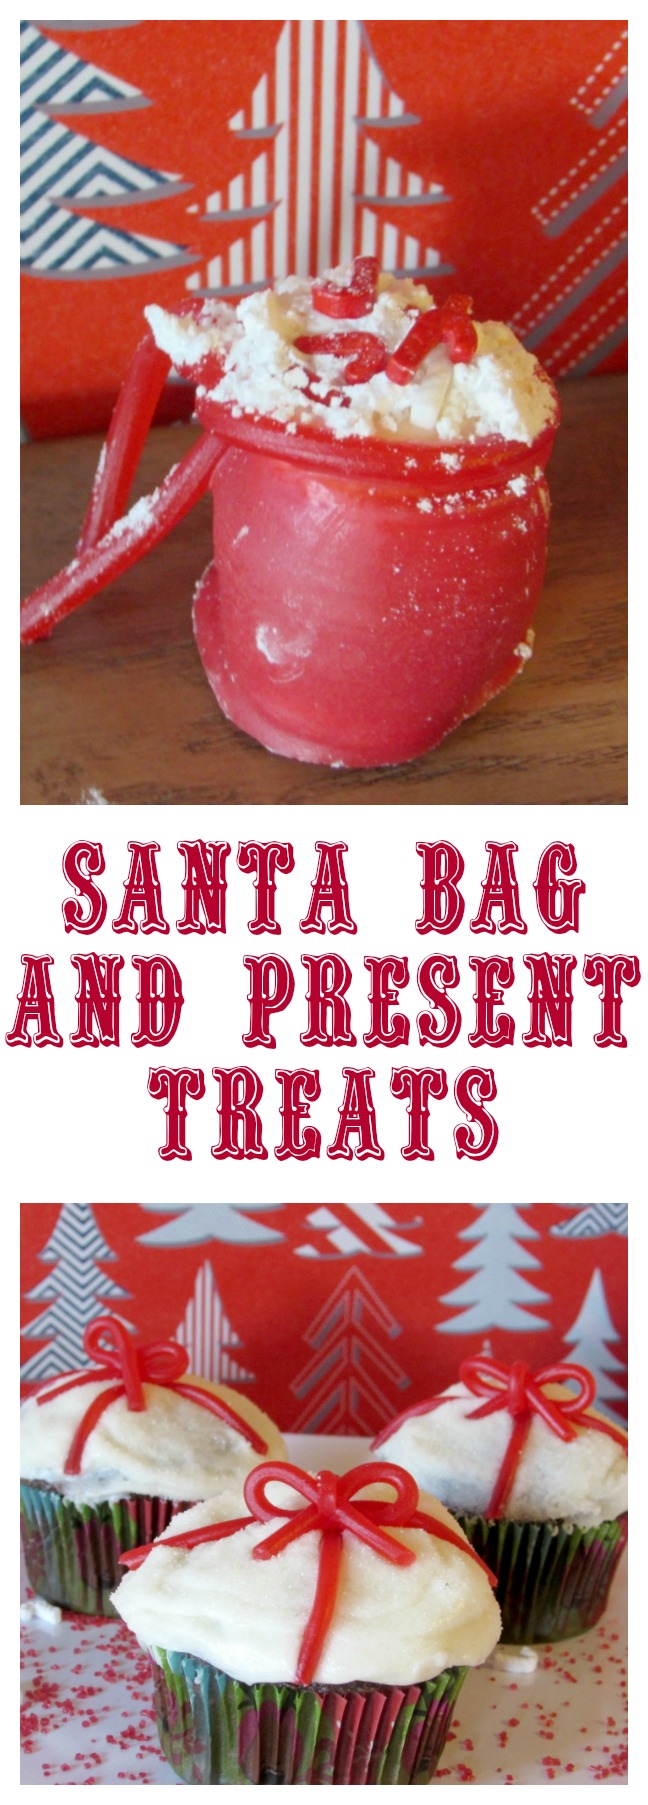 Santa Bag and Present Treats. How to make marshmallow Santa bags with snow and candy canes inside. Also present cupcakes for Santa